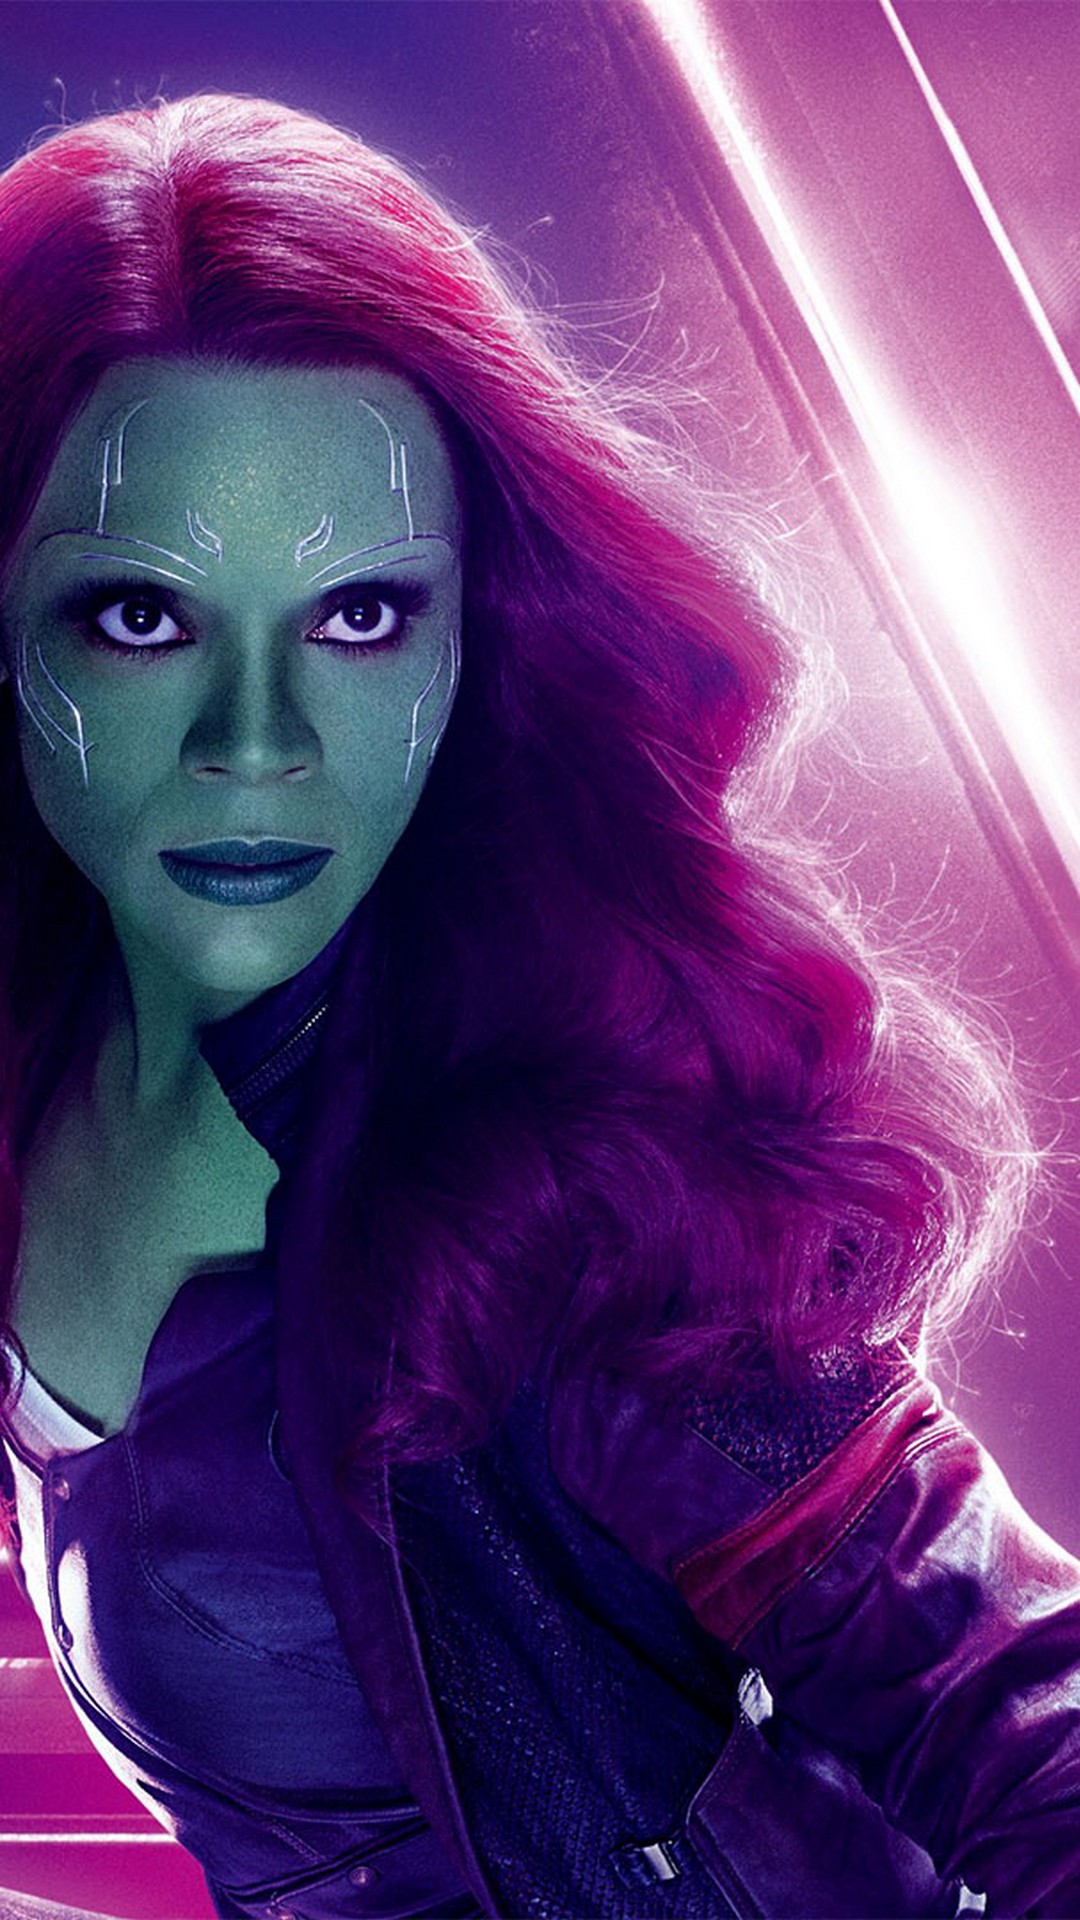 Gamora Avengers Endgame iPhone Wallpaper with high-resolution 1080x1920 pixel. You can use this poster wallpaper for your Desktop Computers, Mac Screensavers, Windows Backgrounds, iPhone Wallpapers, Tablet or Android Lock screen and another Mobile device